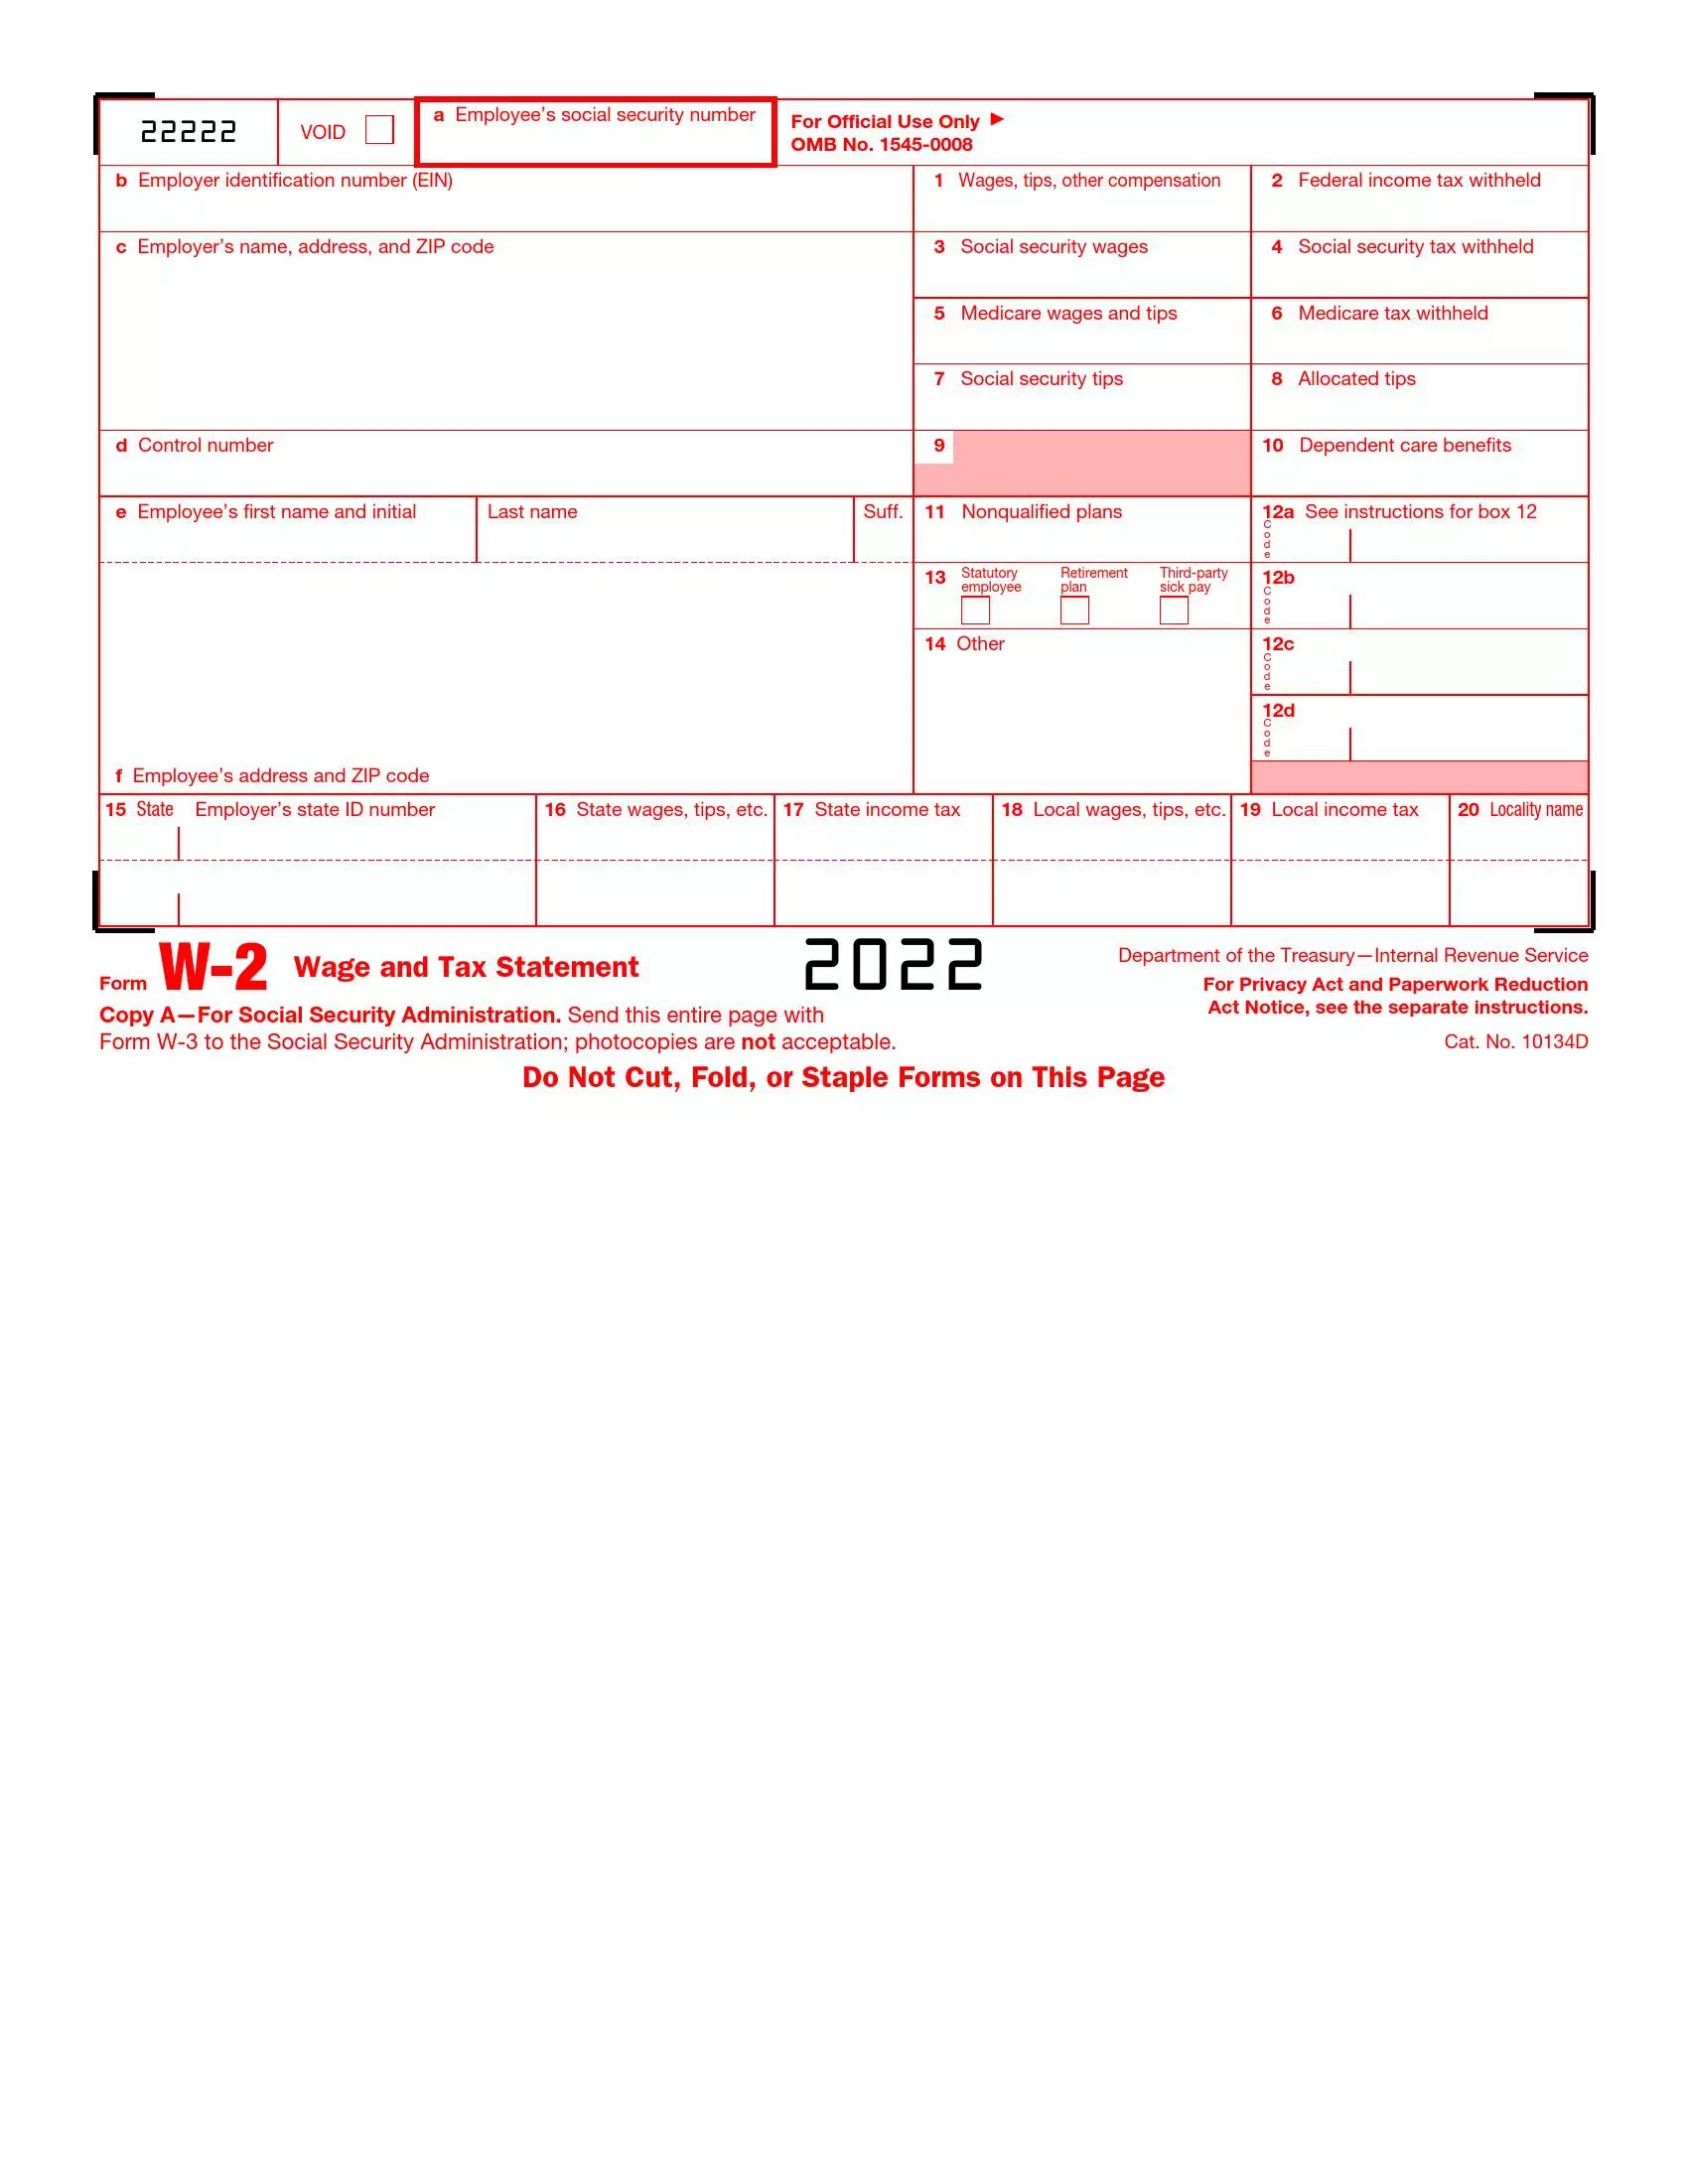 Irs Form W-2 ≡ Fill Out Printable Pdf Forms Online regarding Printable W2 Form 2022